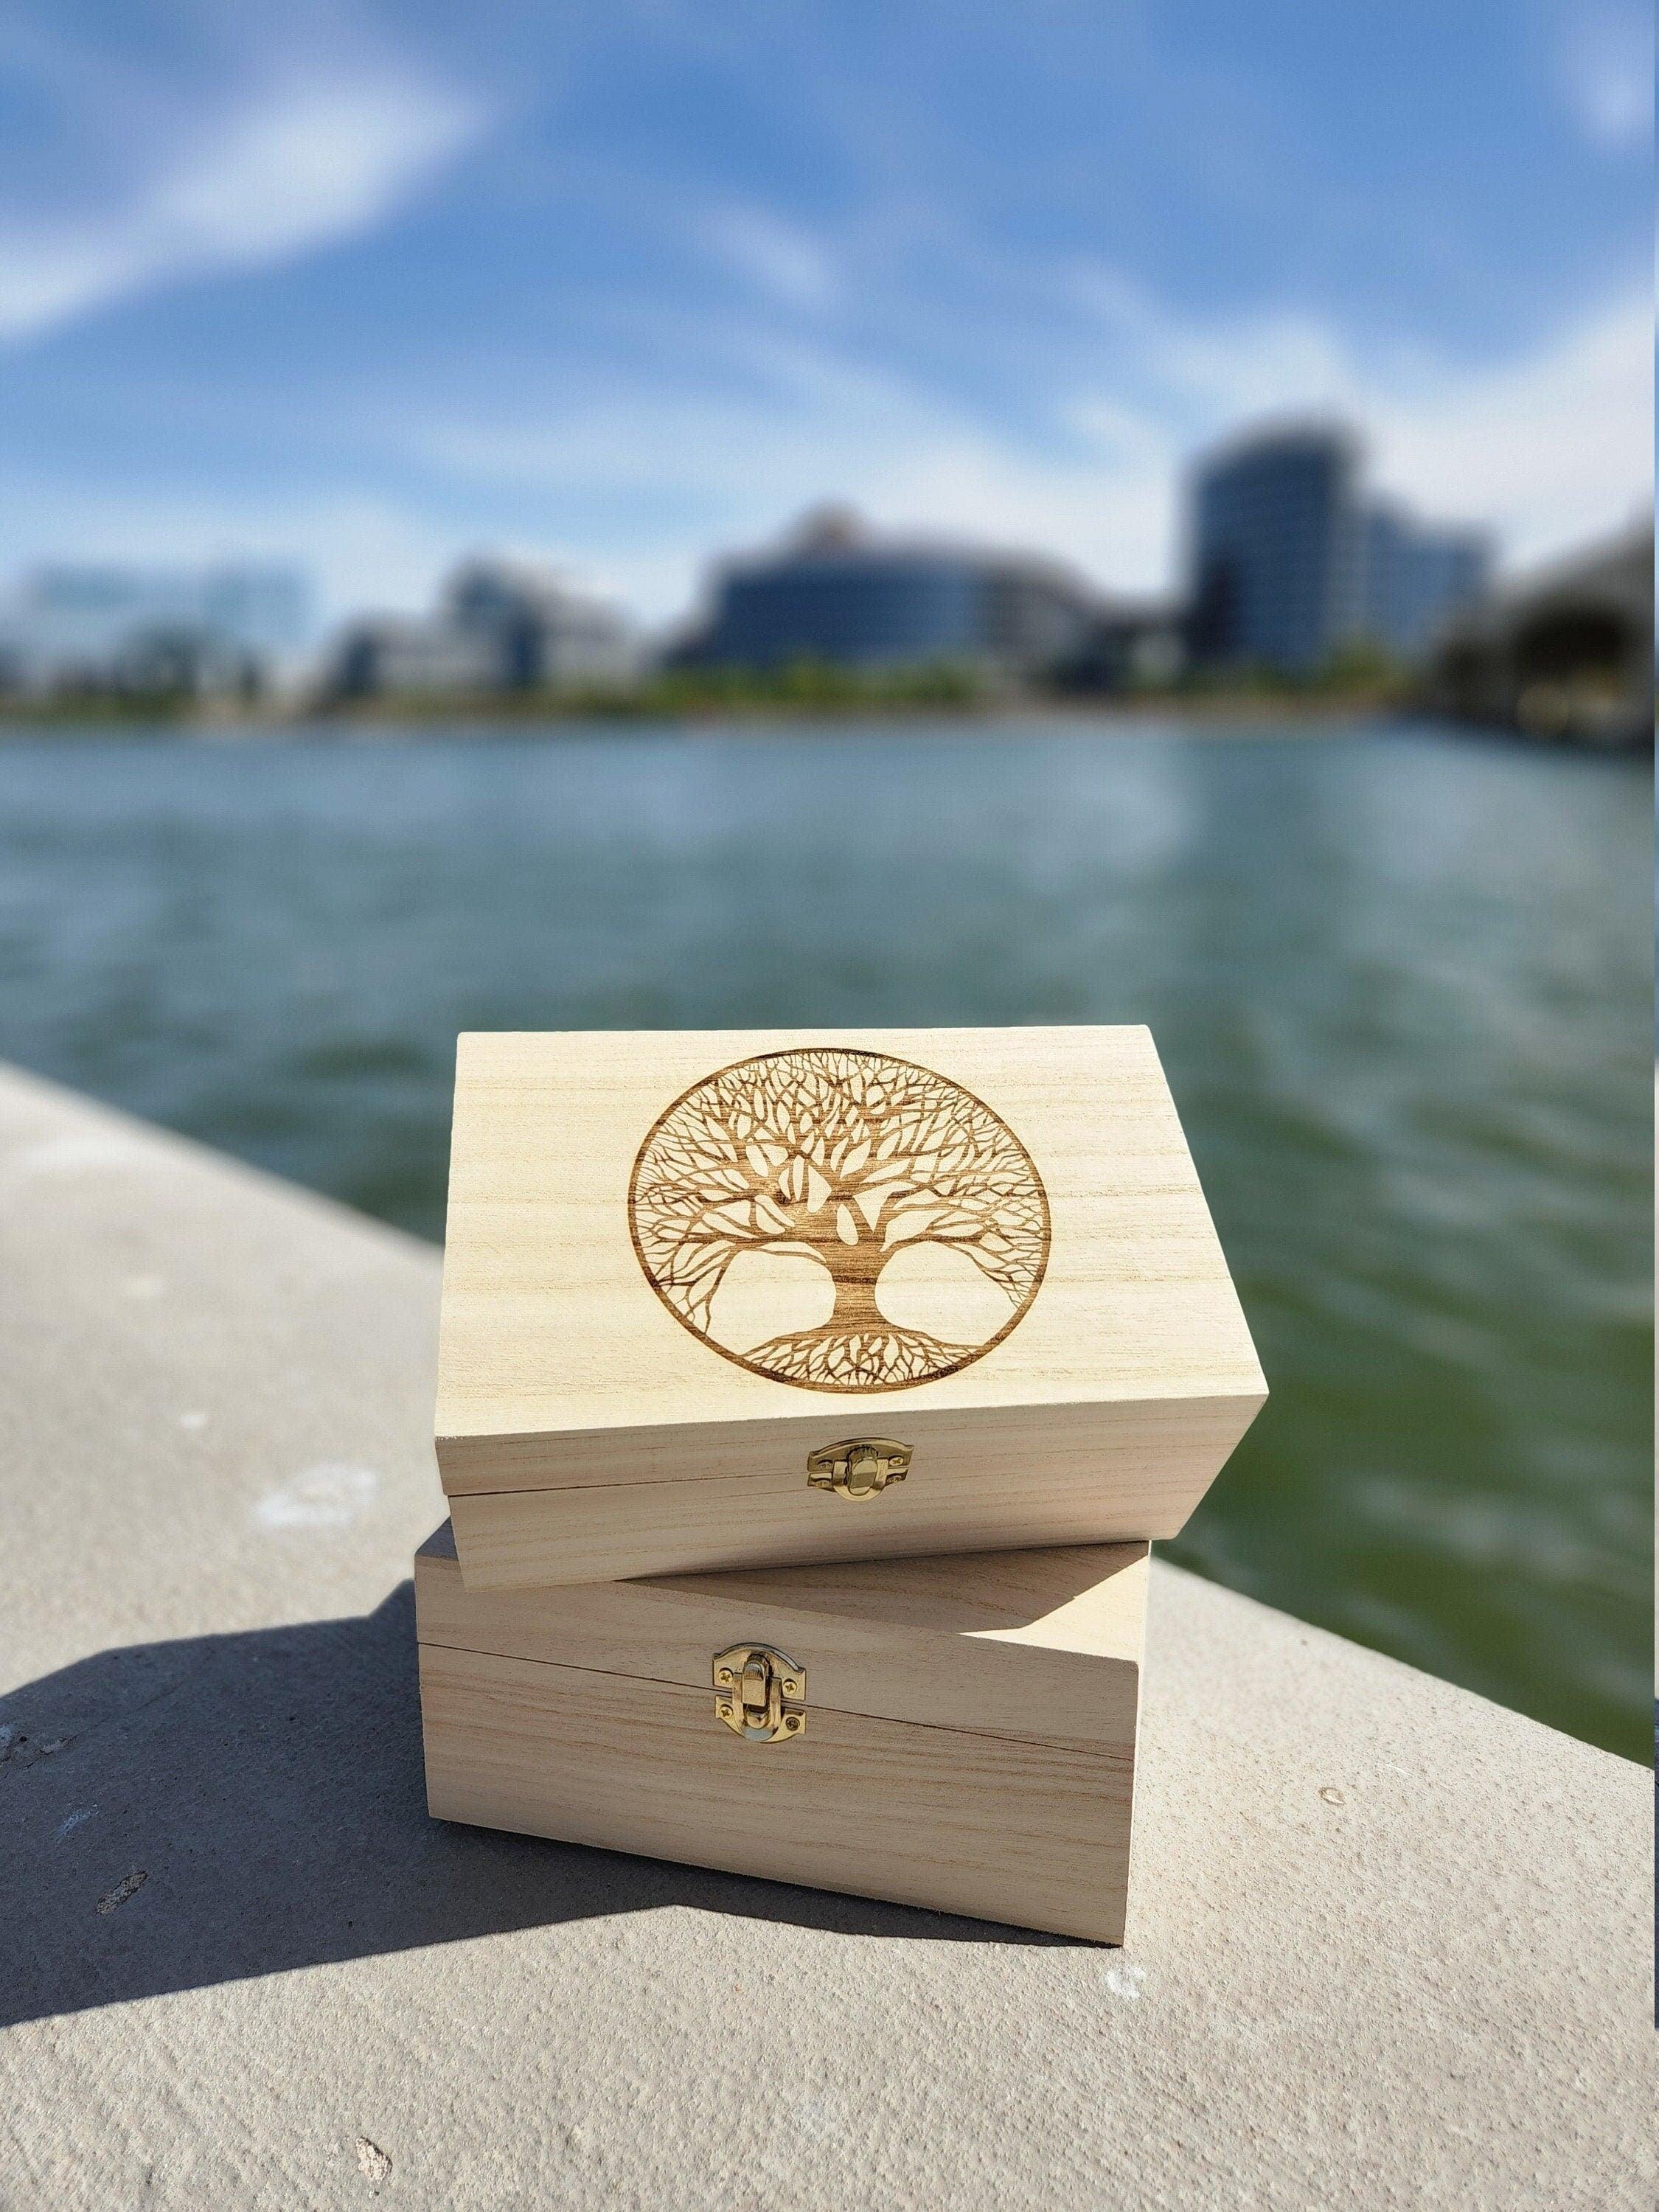 Tree of Life Engraving Over Lake - The Bud Butler